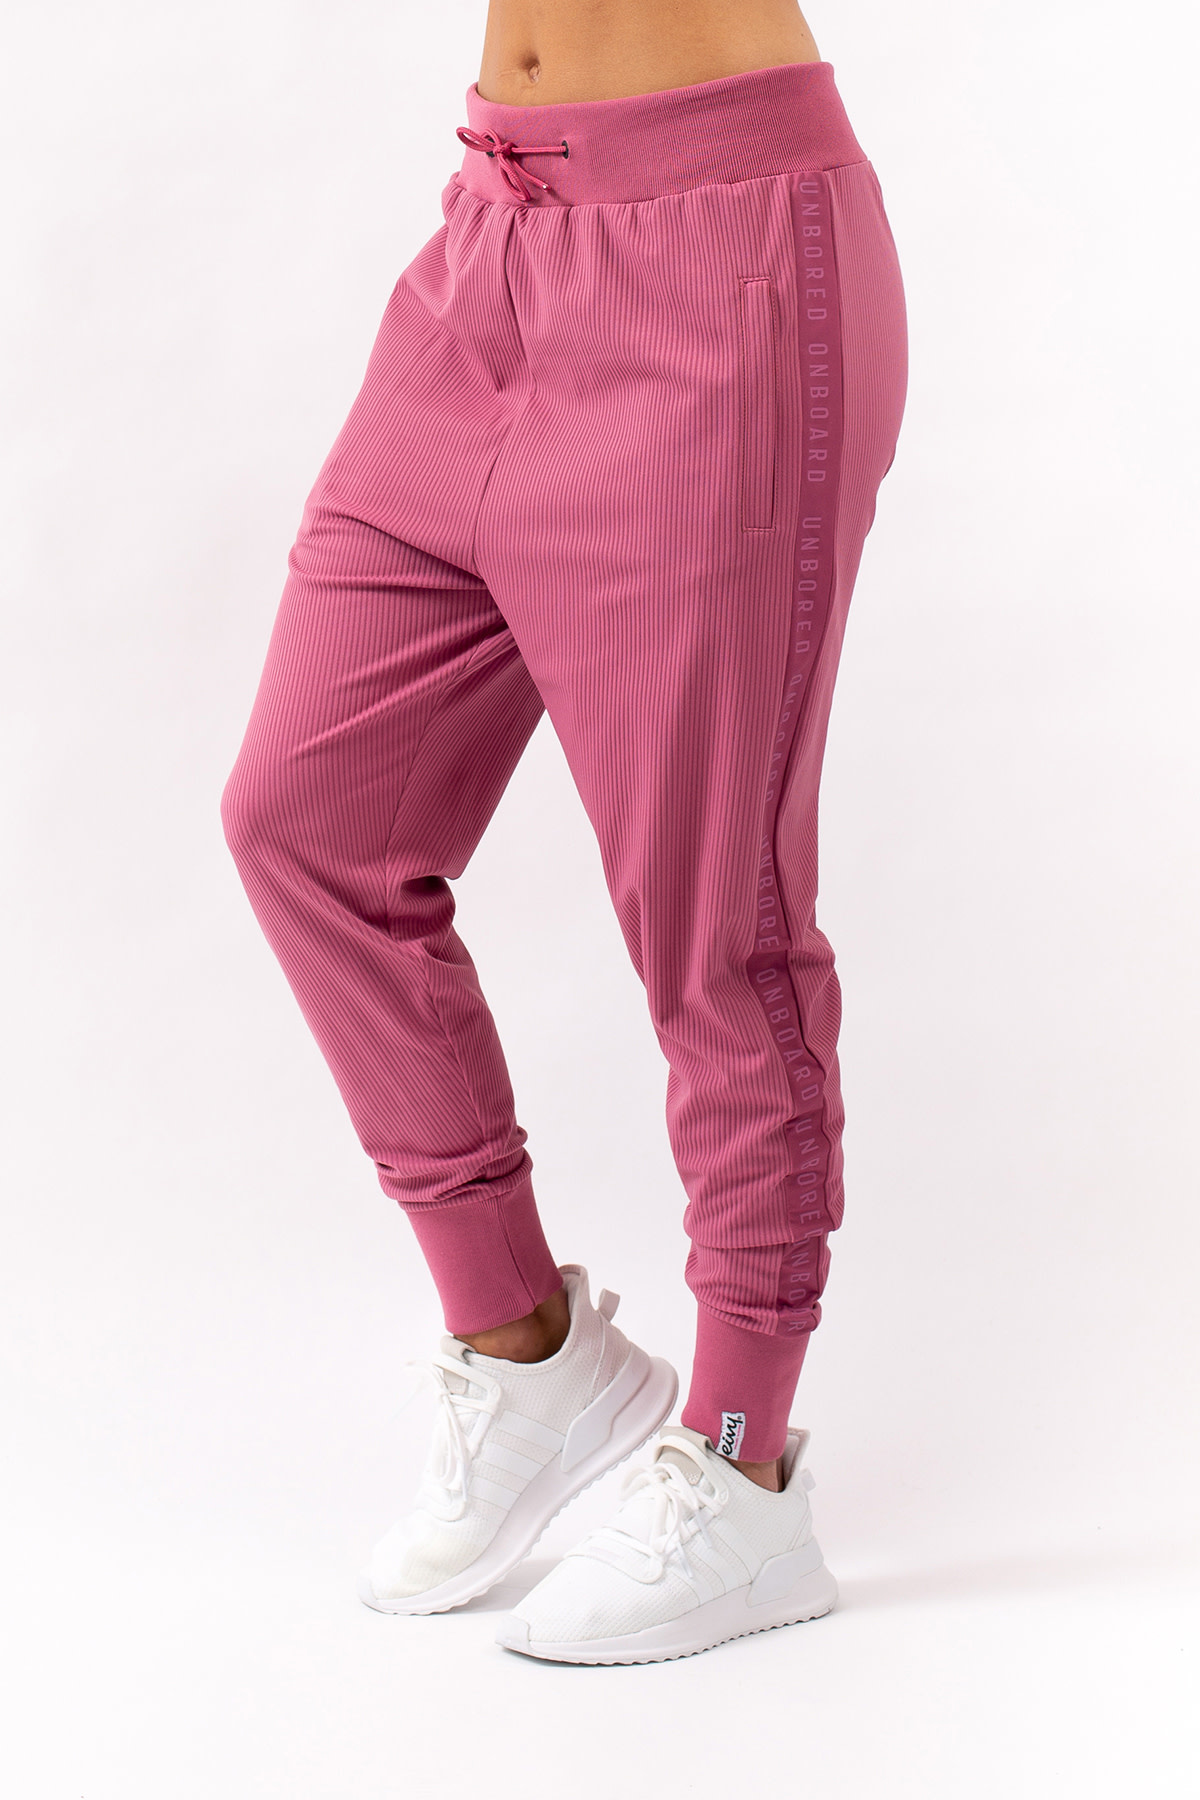 Chlorophylle Move-On Pants - Womens, FREE SHIPPING in Canada